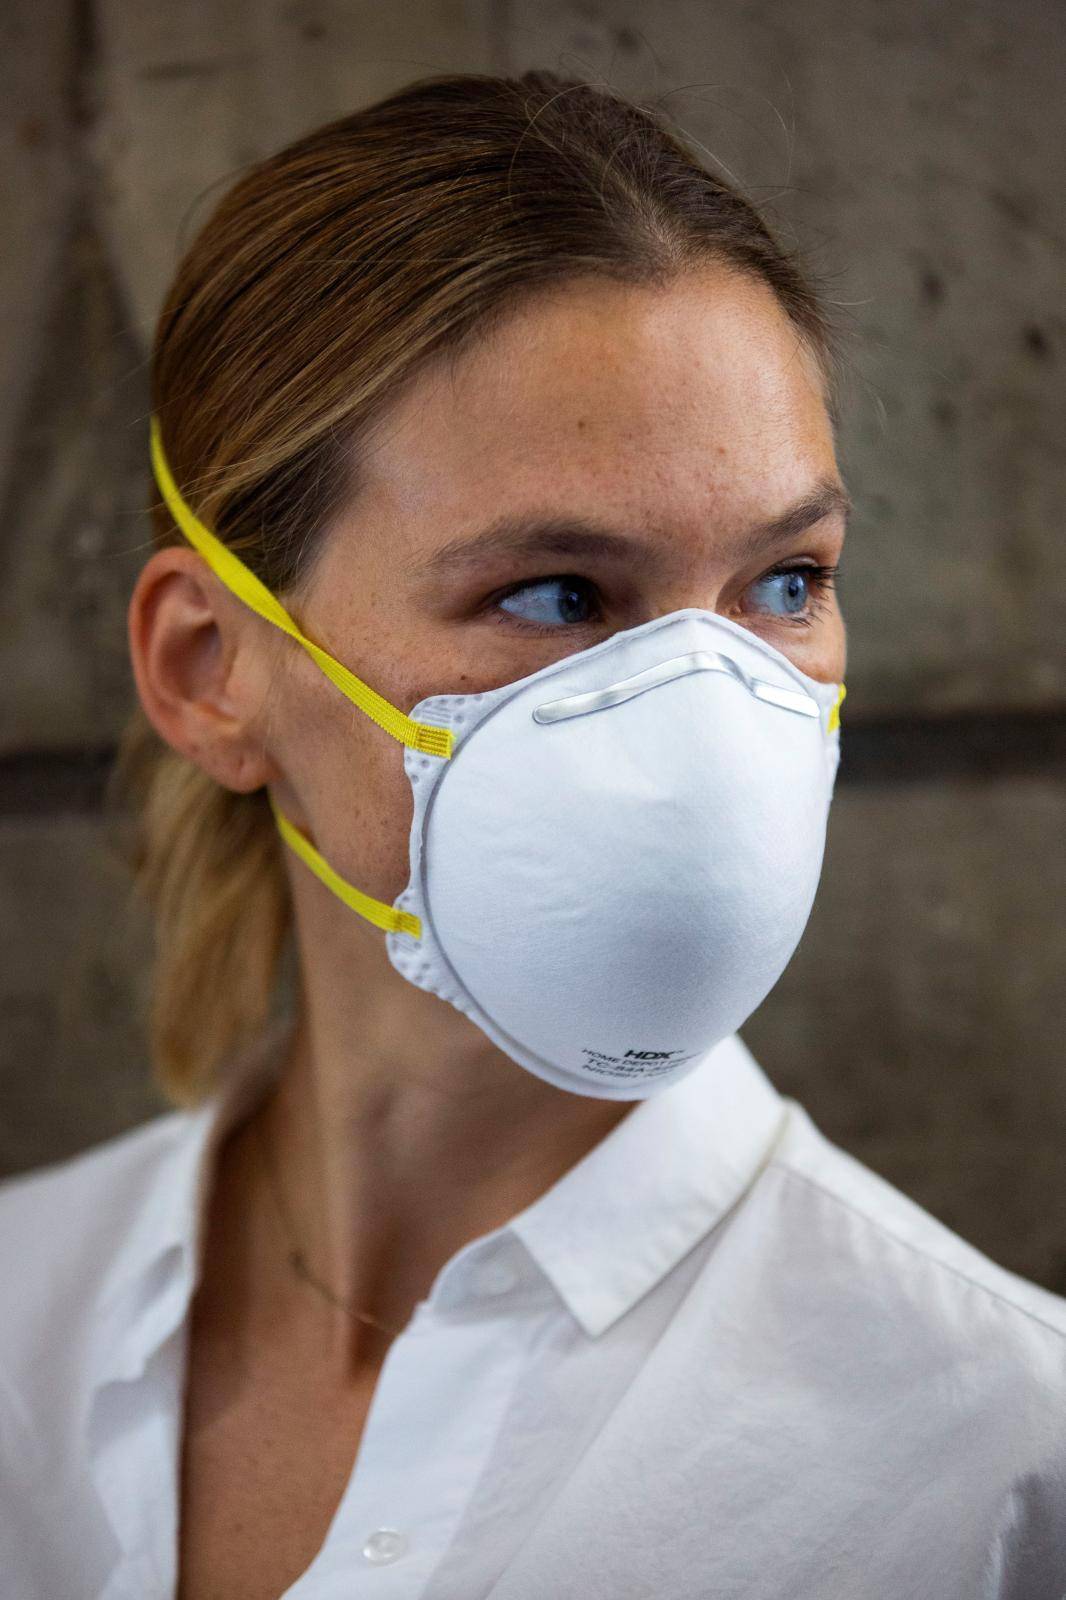 Israeli model Bar Refaeli wears a face mask as she arrives for a hearing in the tax evasion case against her and her mother Tzipi, at a court in Tel Aviv, Israel